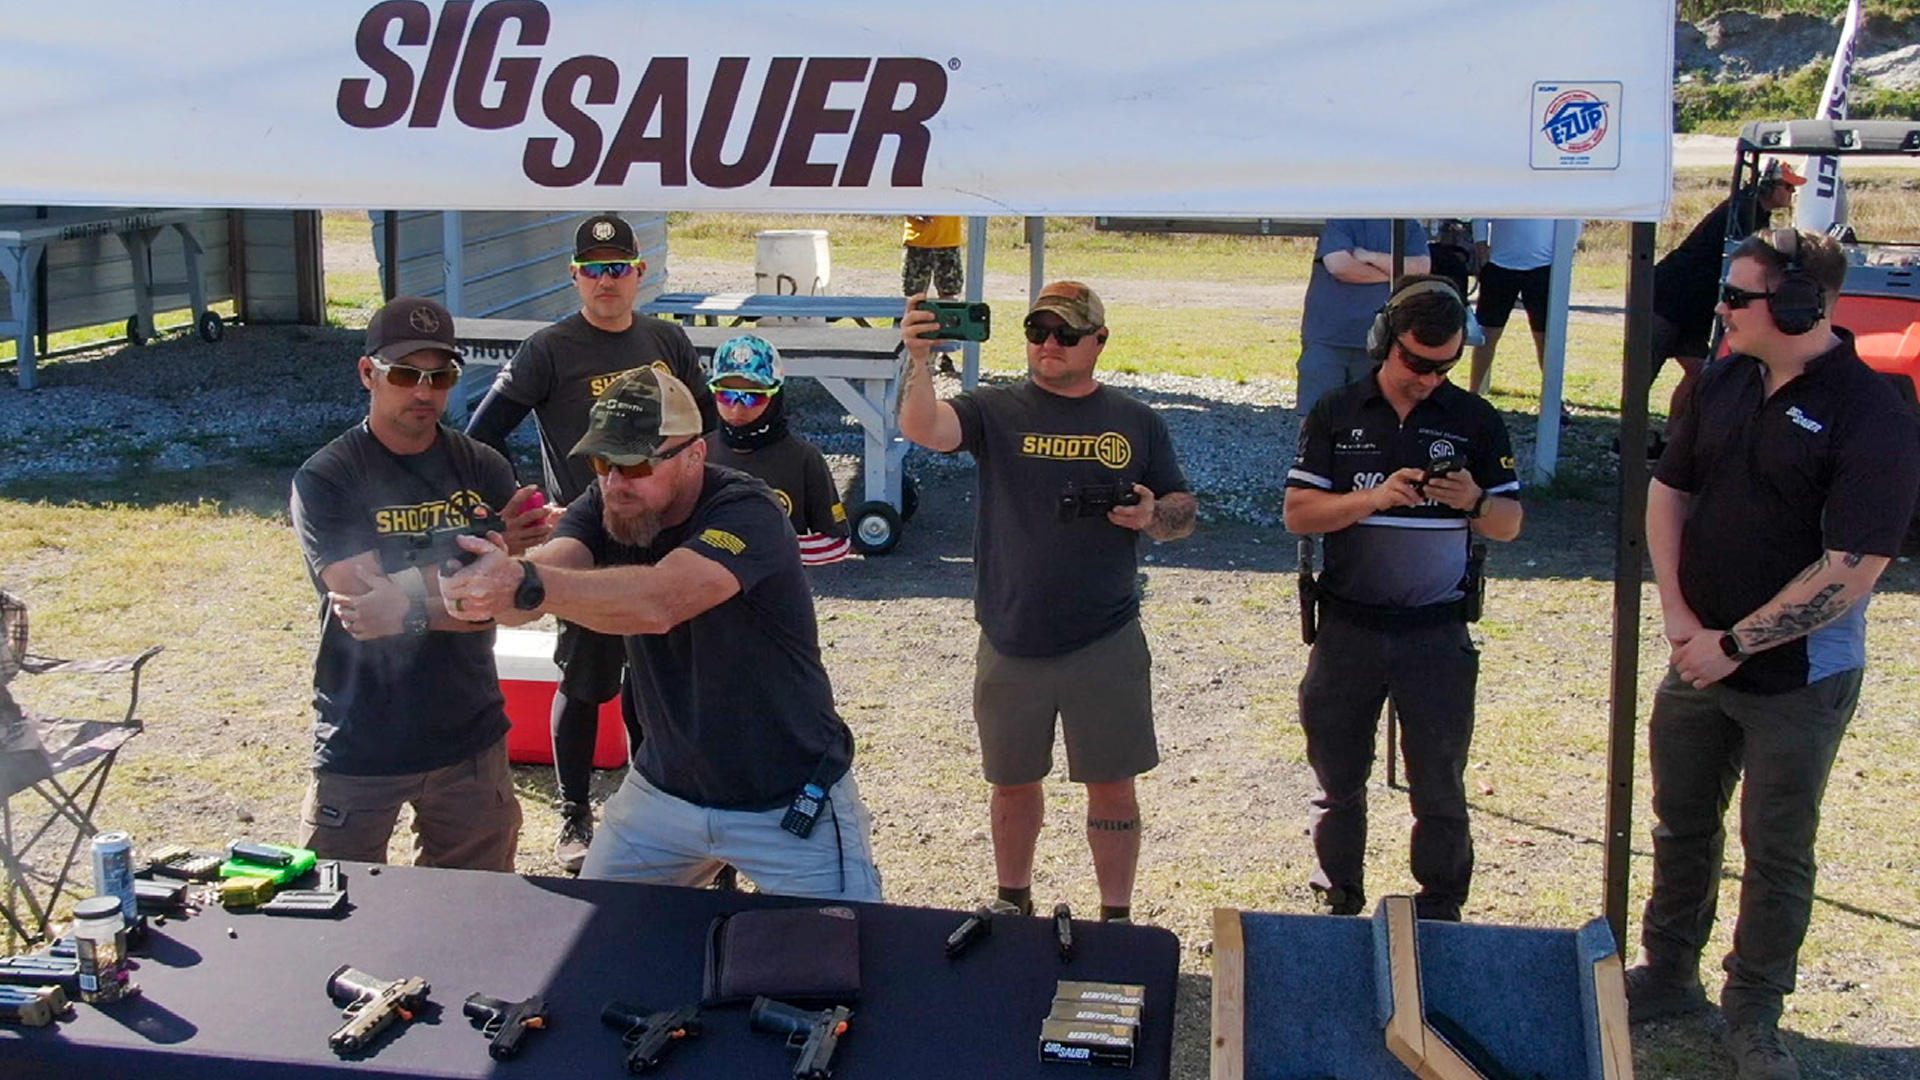 SHOOT SIG competition